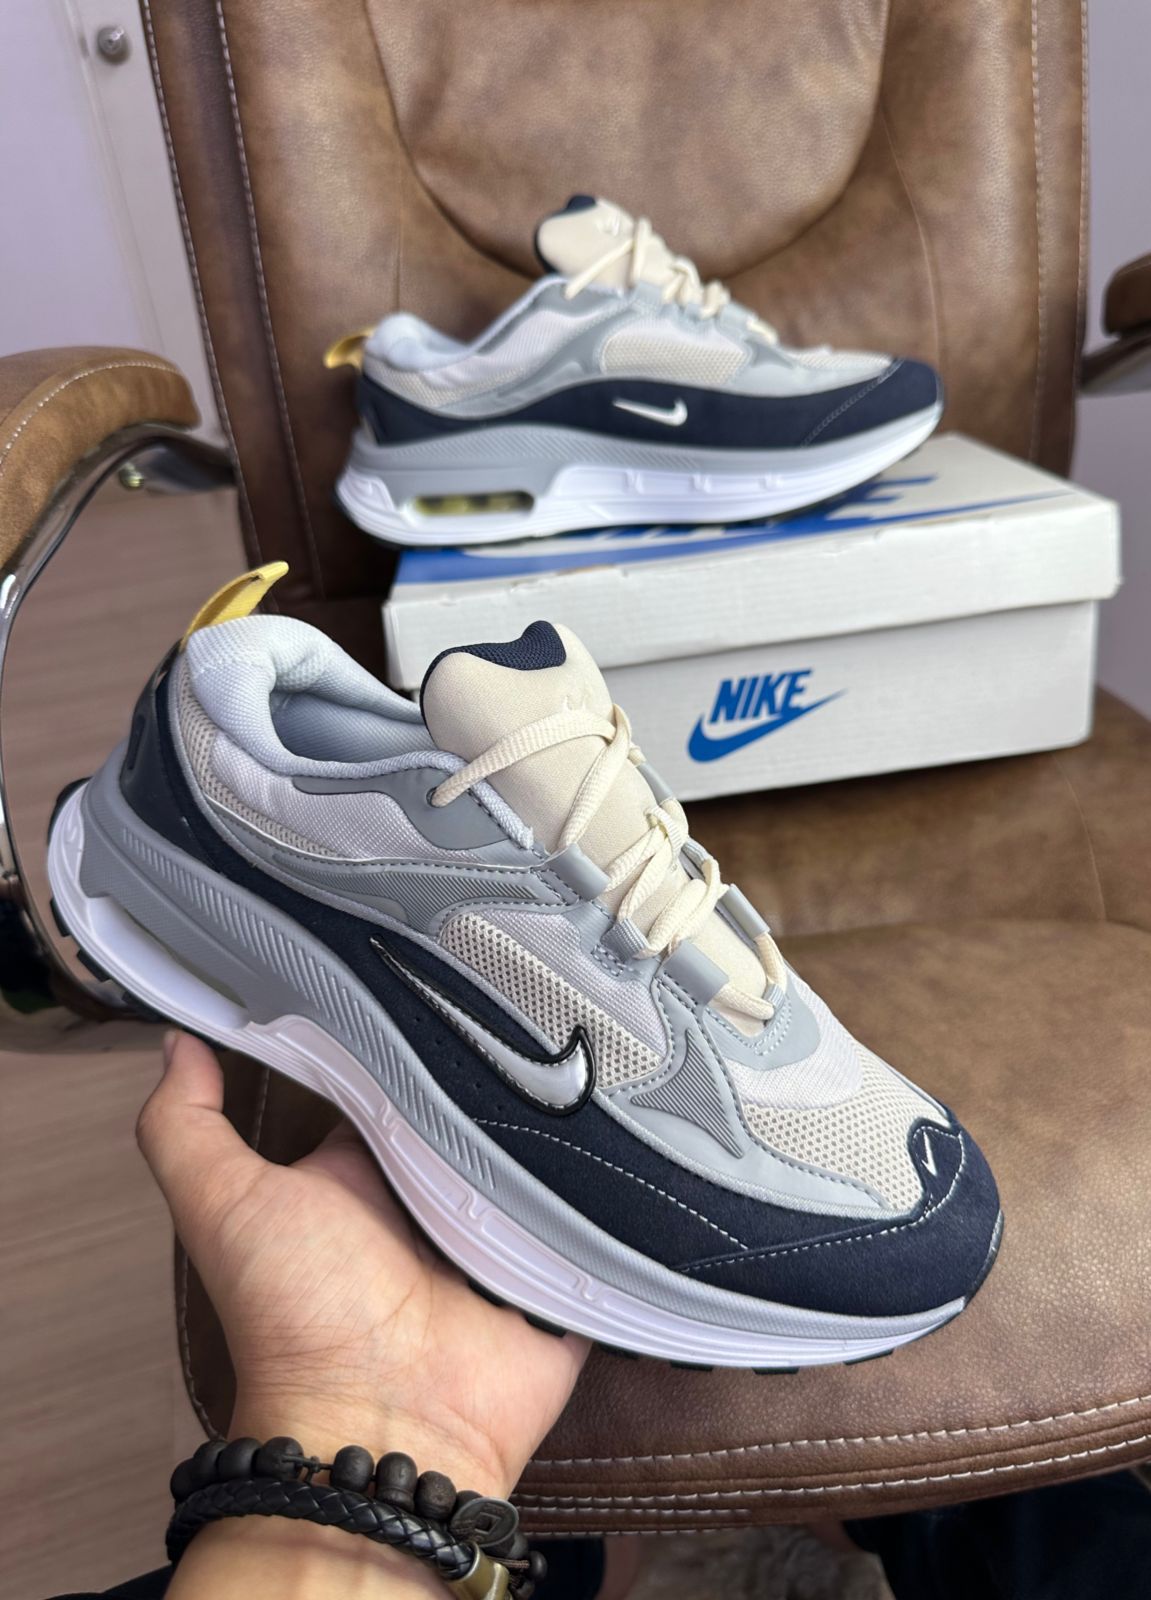 Airmax Bliss Sneakers In Stock